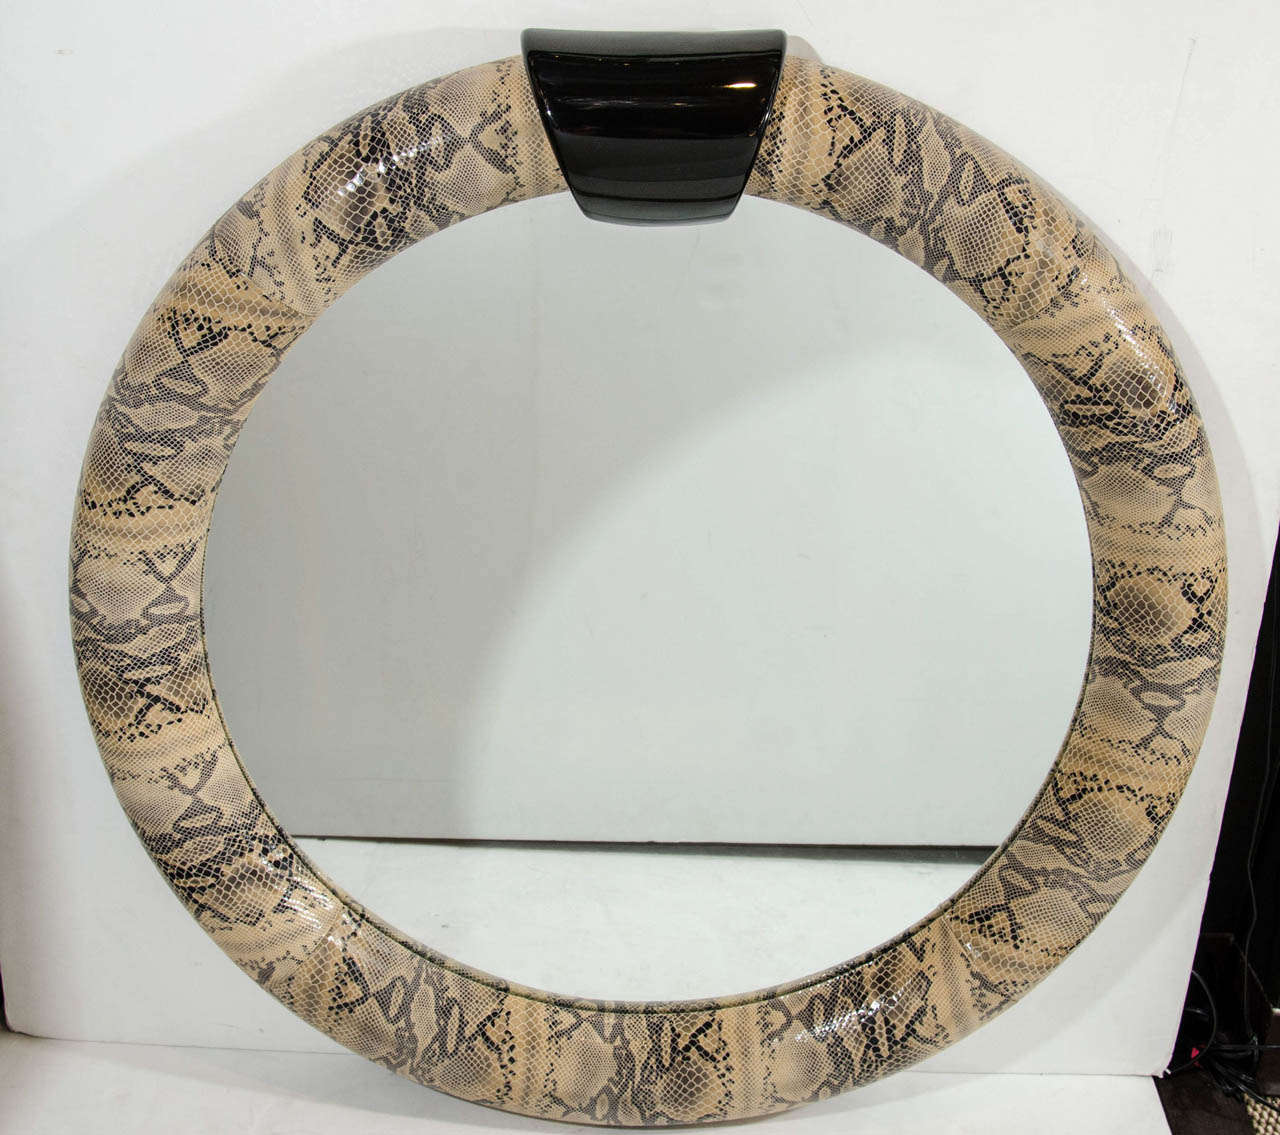 1970s Round mirror wrapped in embossed leather with python snakeskin design. Features an ebonized lacquered wood pediment detail.